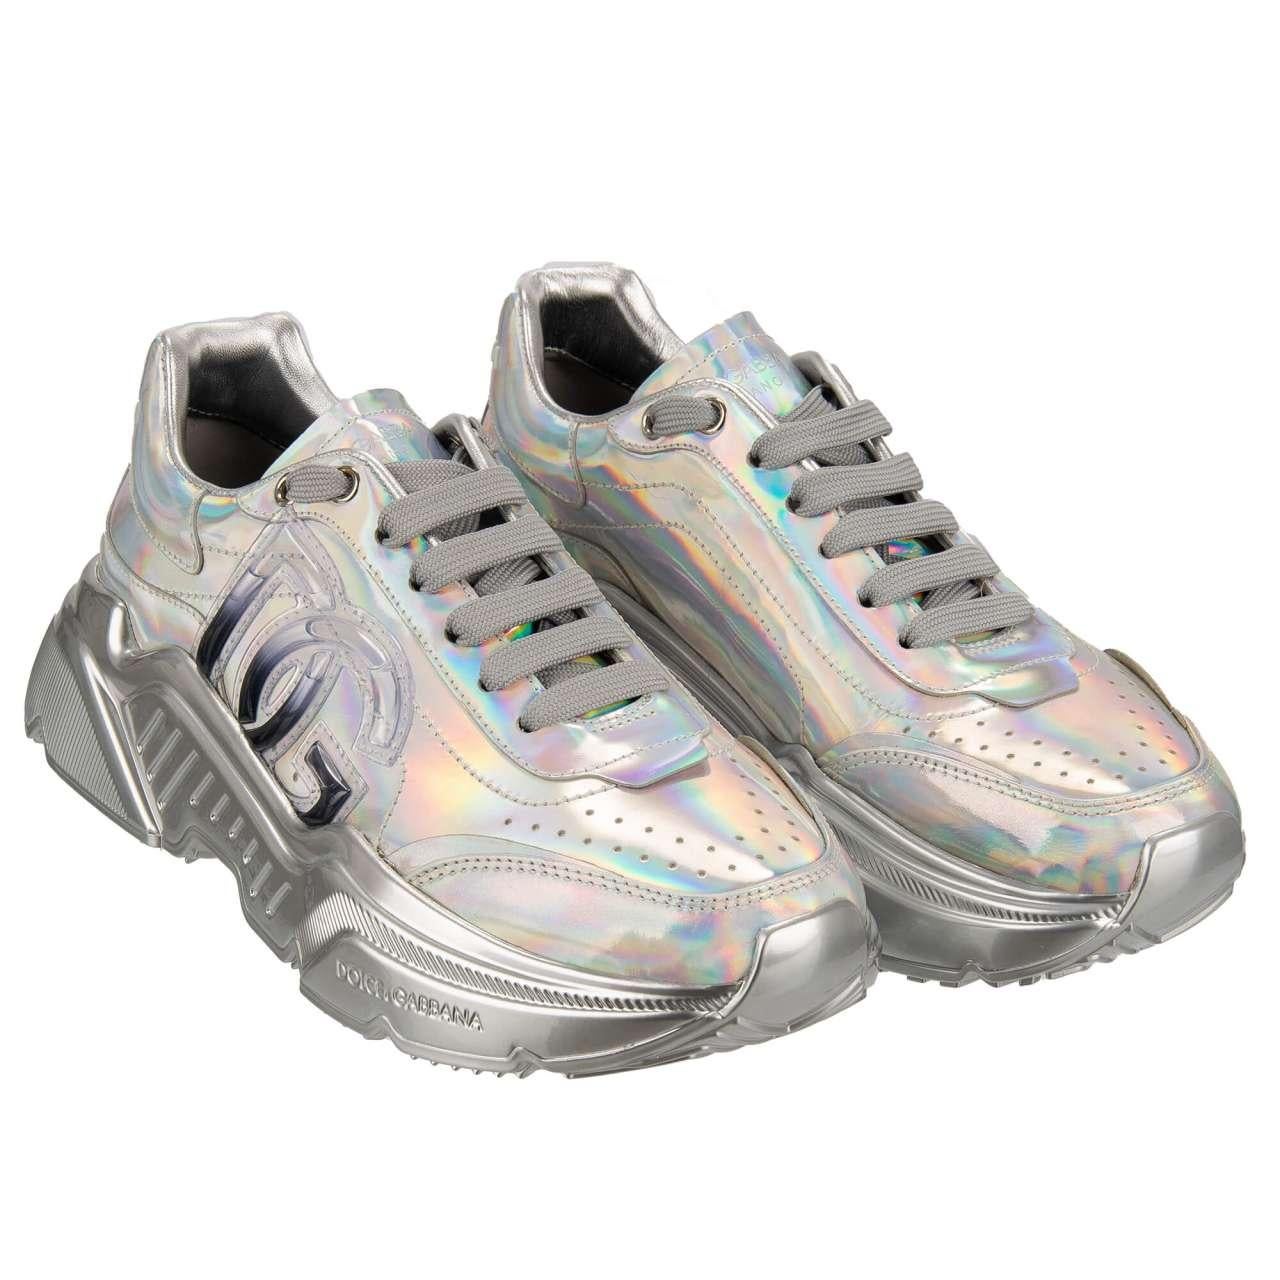 - Lace Sneaker DAYMASTER with rainbow shimmer silver and liquid DG logo by DOLCE & GABBANA - New with Box - MADE IN ITALY - Former RRP: EUR 695 - Model: CK1791-AQ495-80998 - Material: 100% Calf leather - Sole: Rubber - Color: Silver - Dolce&Gabbana